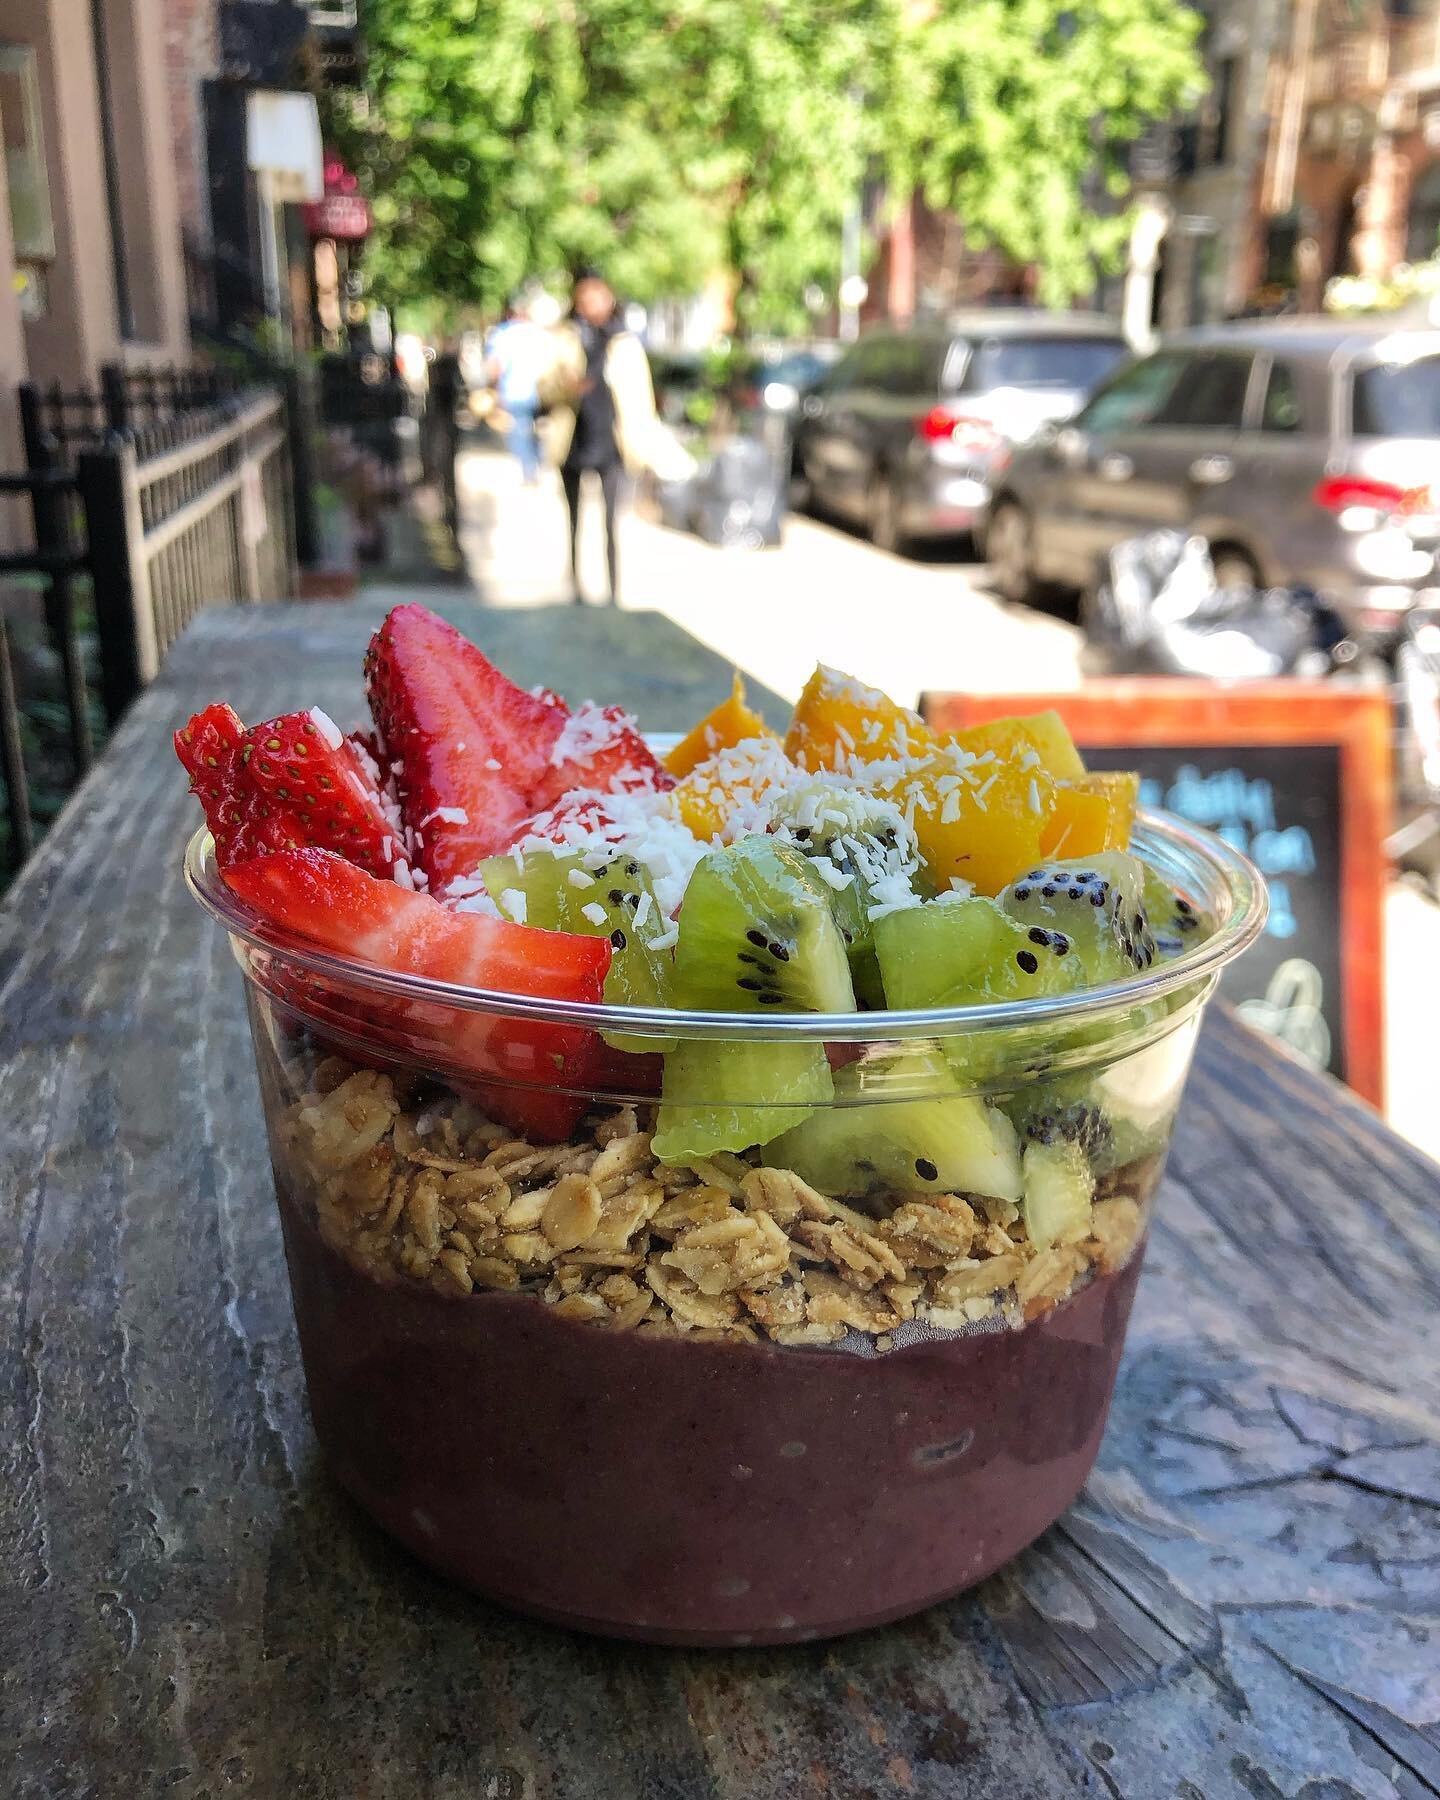 The flowers are blossoming and so are our bowls 🌼🌸🌺

📍 EAST VILLAGE
💌 Catering: info@agavijuice.com
✨ 100% Raw 100% Vegan 100% Love
🏳️&zwj;🌈 Proudly serving organic acai bowls &amp; juices!
📸 Tag us in your #AGAVI photos!
.
.
AGAVI JUICE | NY